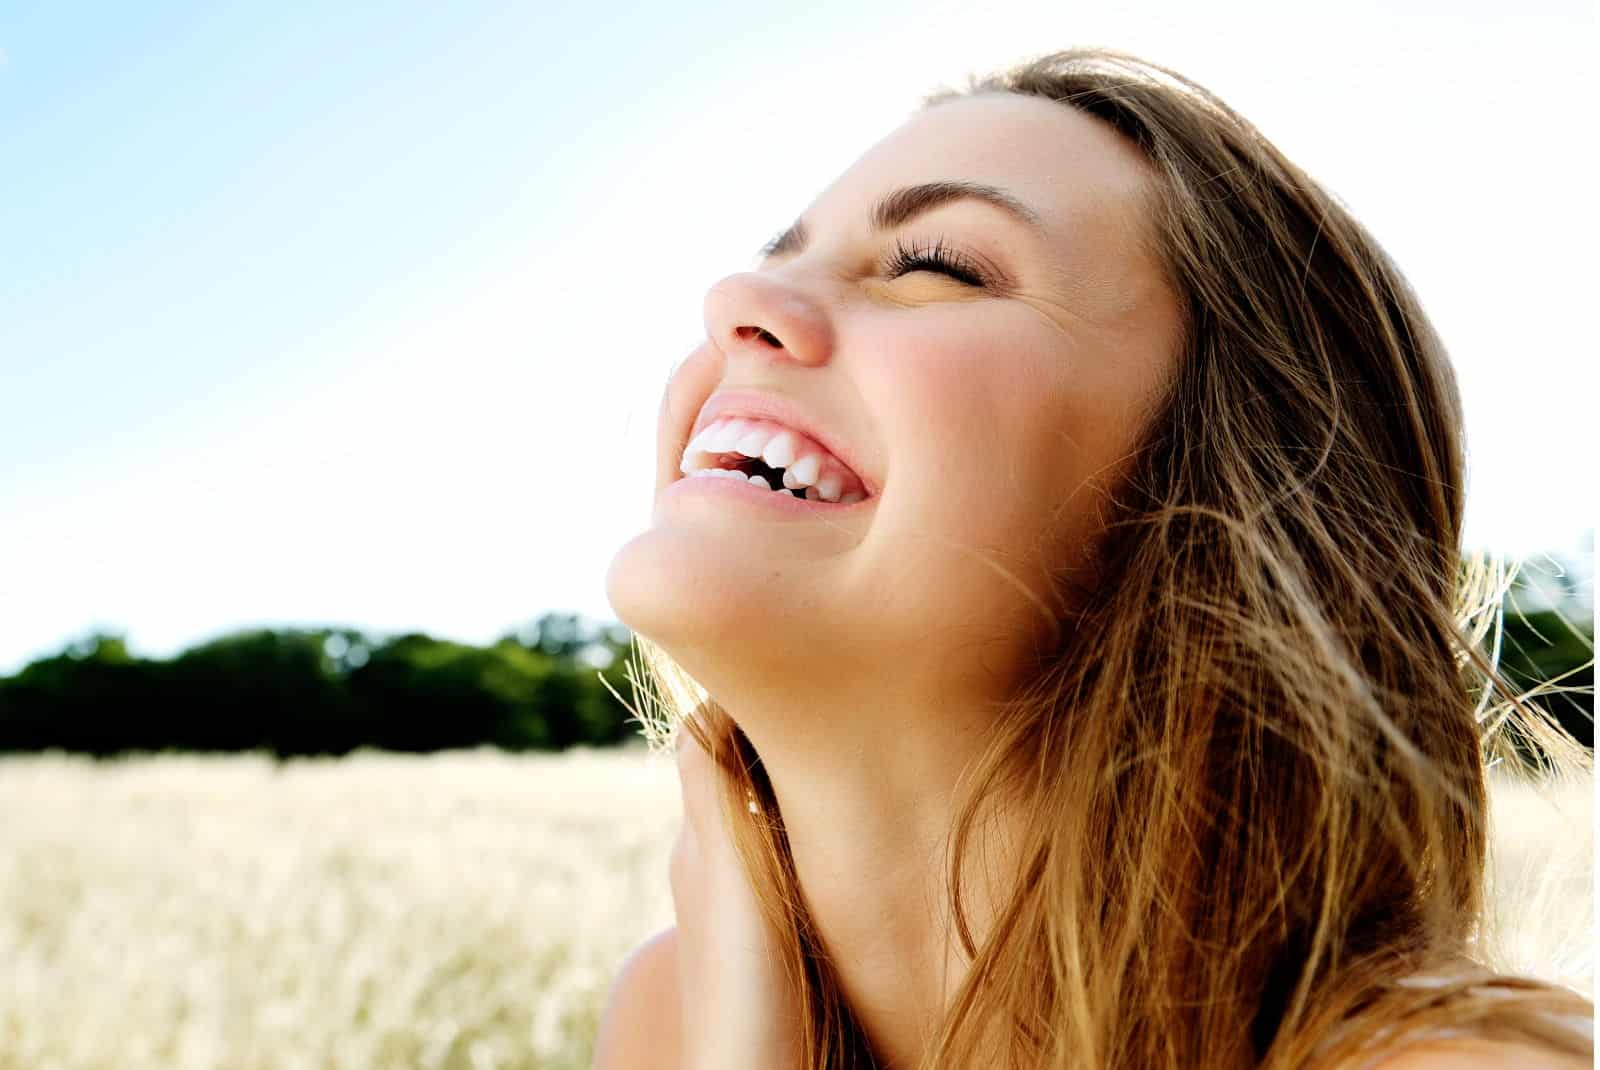 A young woman with a great smile laughs as she enjoys the sunshine out in a field.